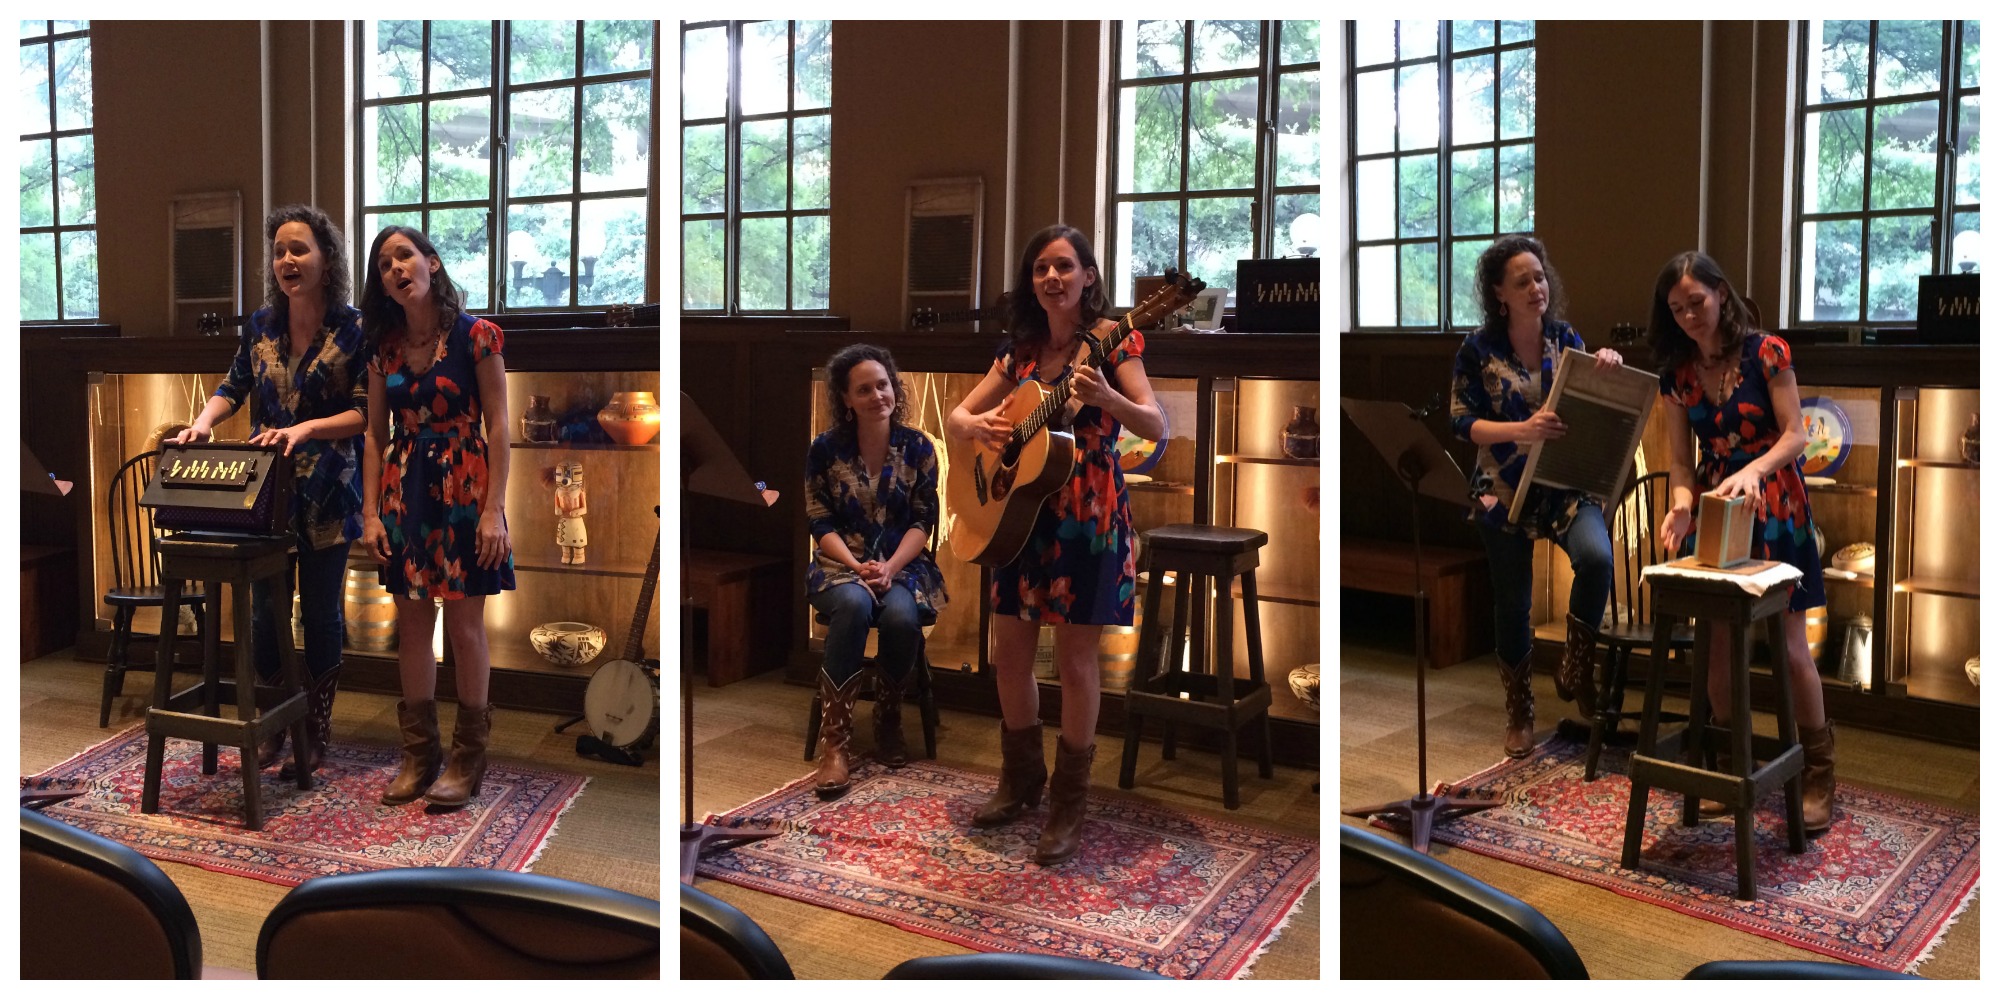 Blue Penny performing American roots music at the Briscoe Western Art Museum, June 30, 2015 | San Antonio Charter Moms